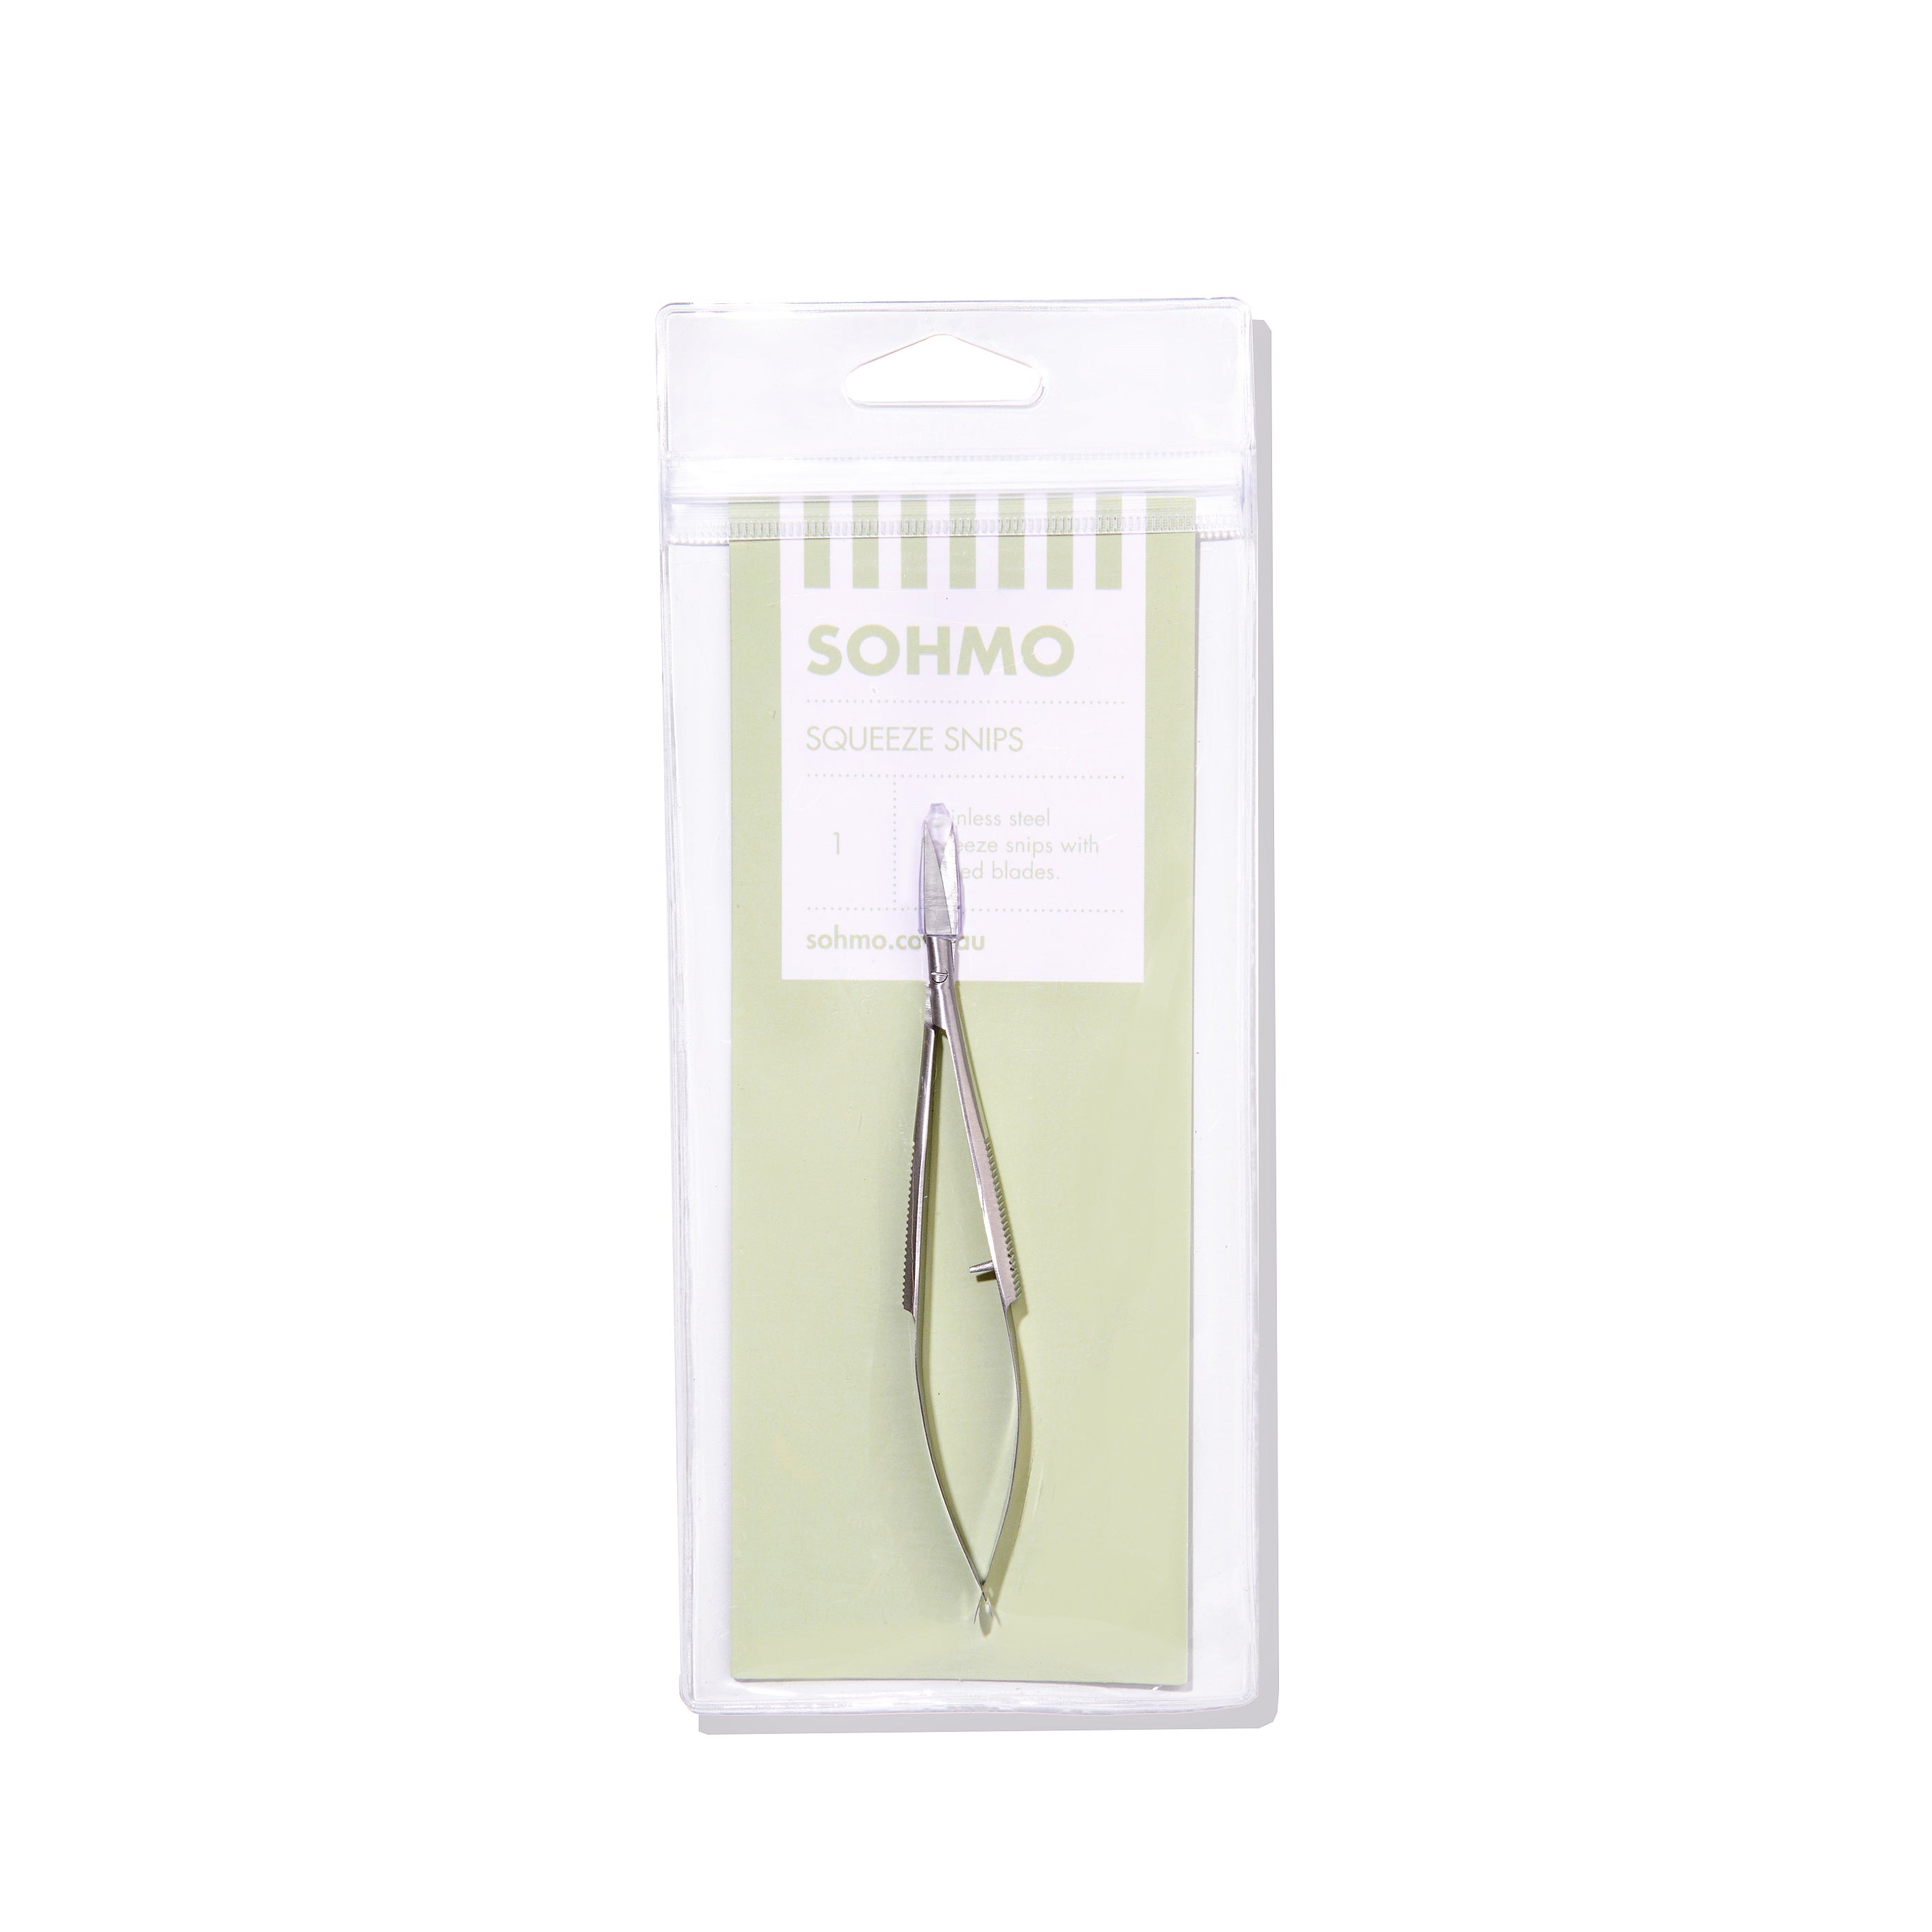 SOHMO Squeeze Snips in reusable vinyl pouch